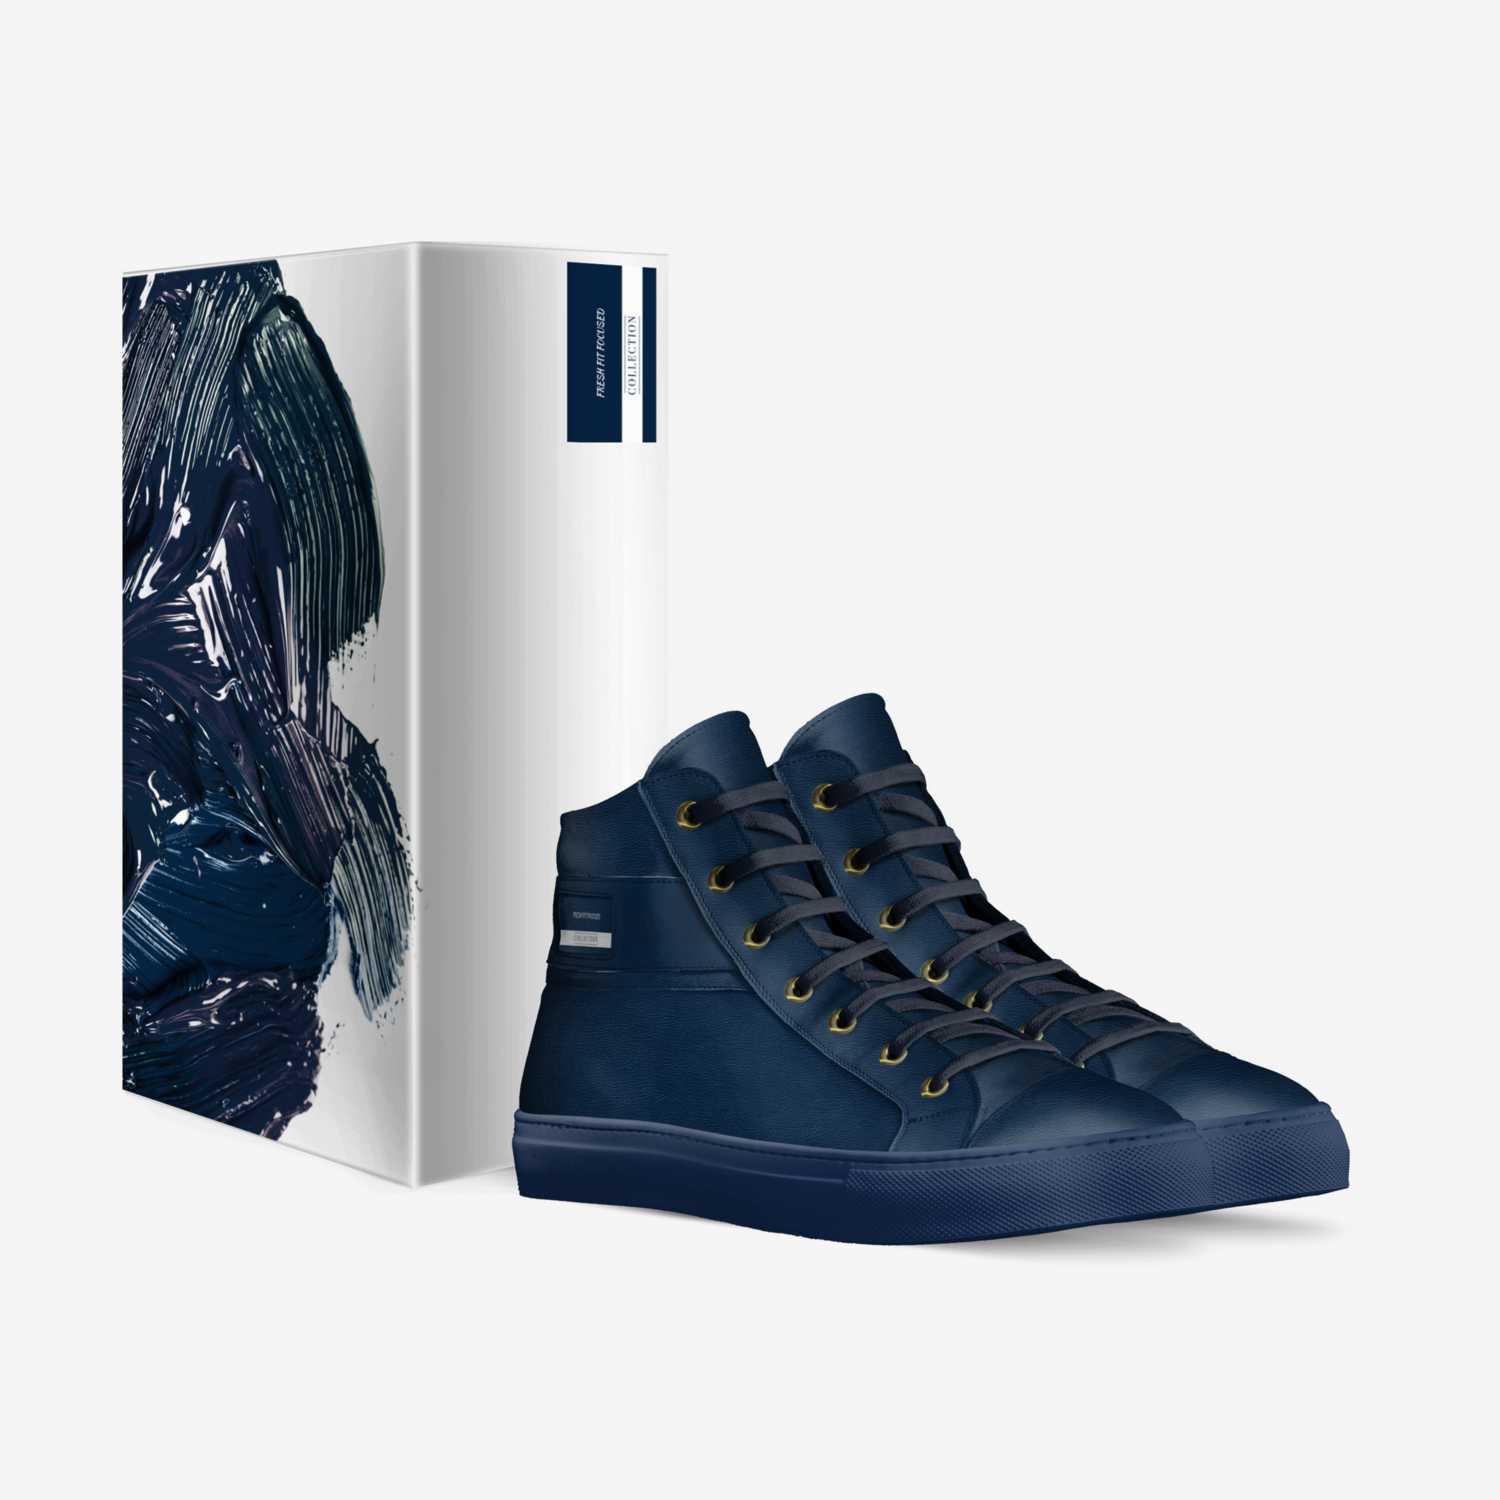 BLUEPRINT-PACIFIC custom made in Italy shoes by Fresh Fit Focused | Box view